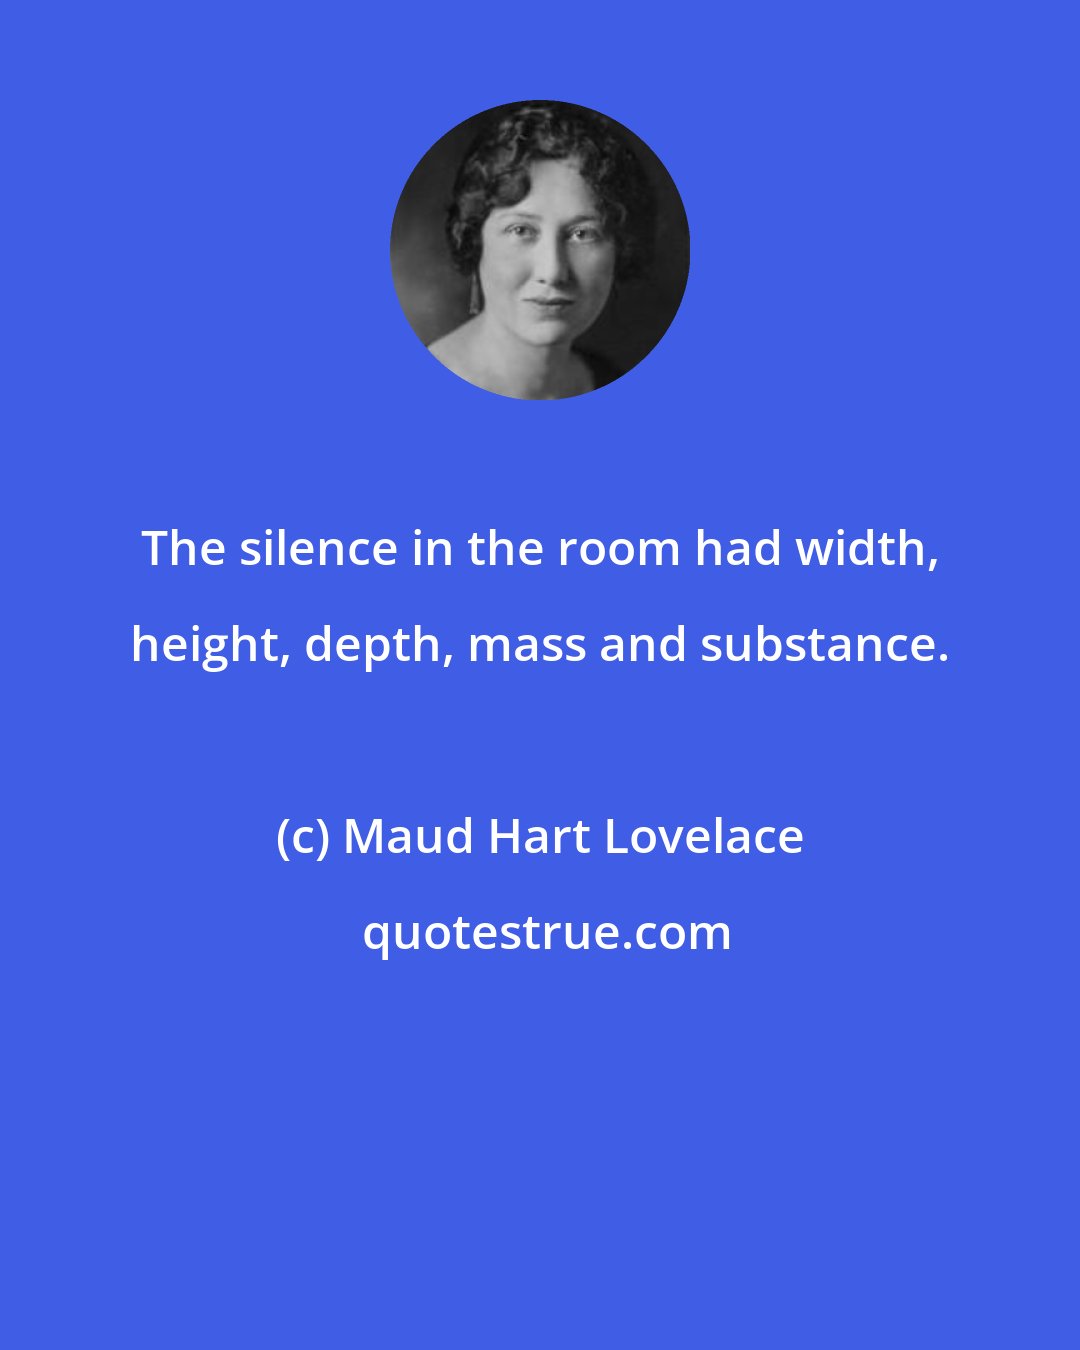 Maud Hart Lovelace: The silence in the room had width, height, depth, mass and substance.